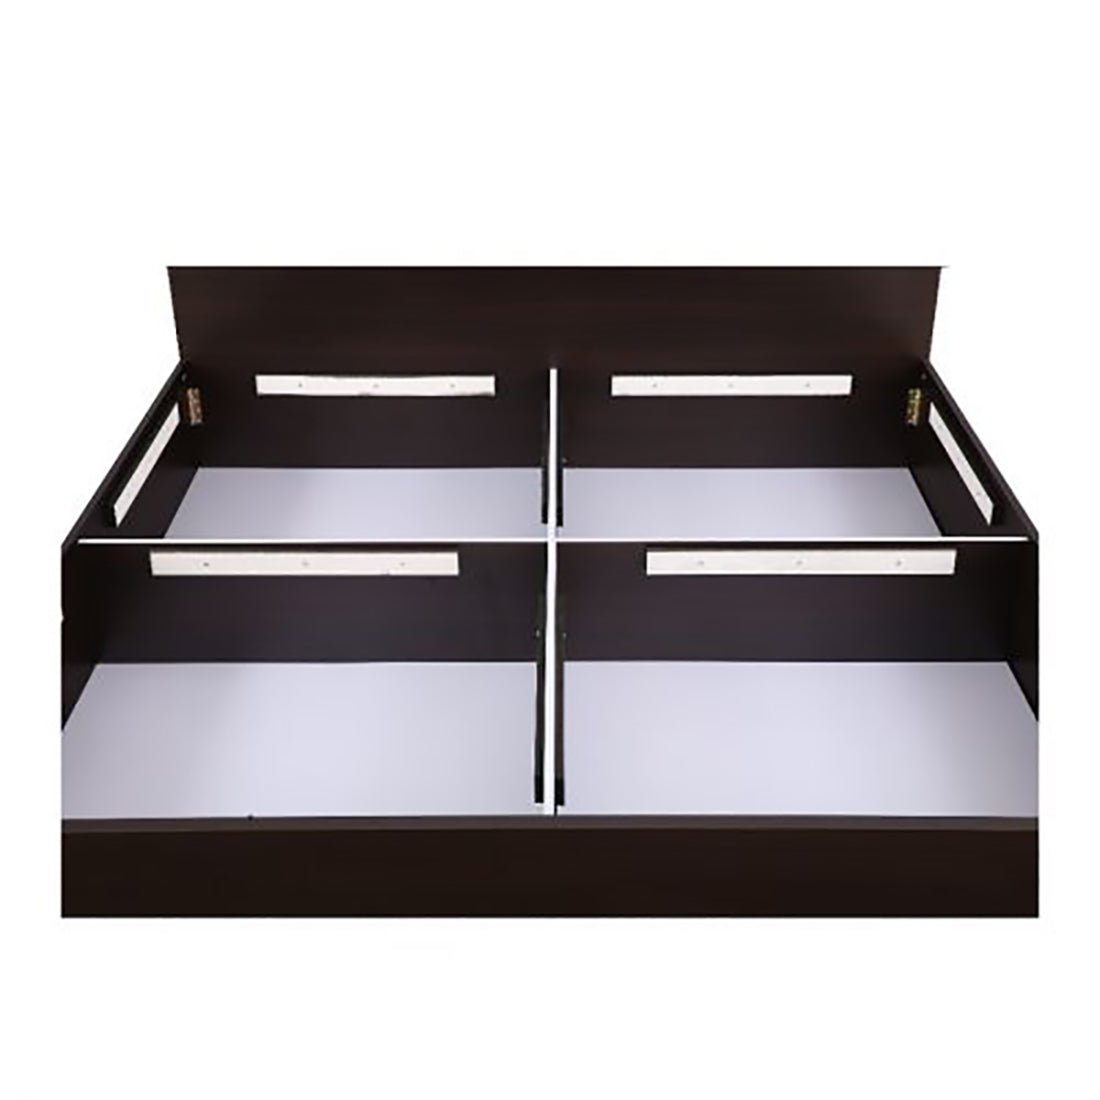 Torque India Stella King Size Bed With Box Storage For Bedroom (Brown) - Torque India